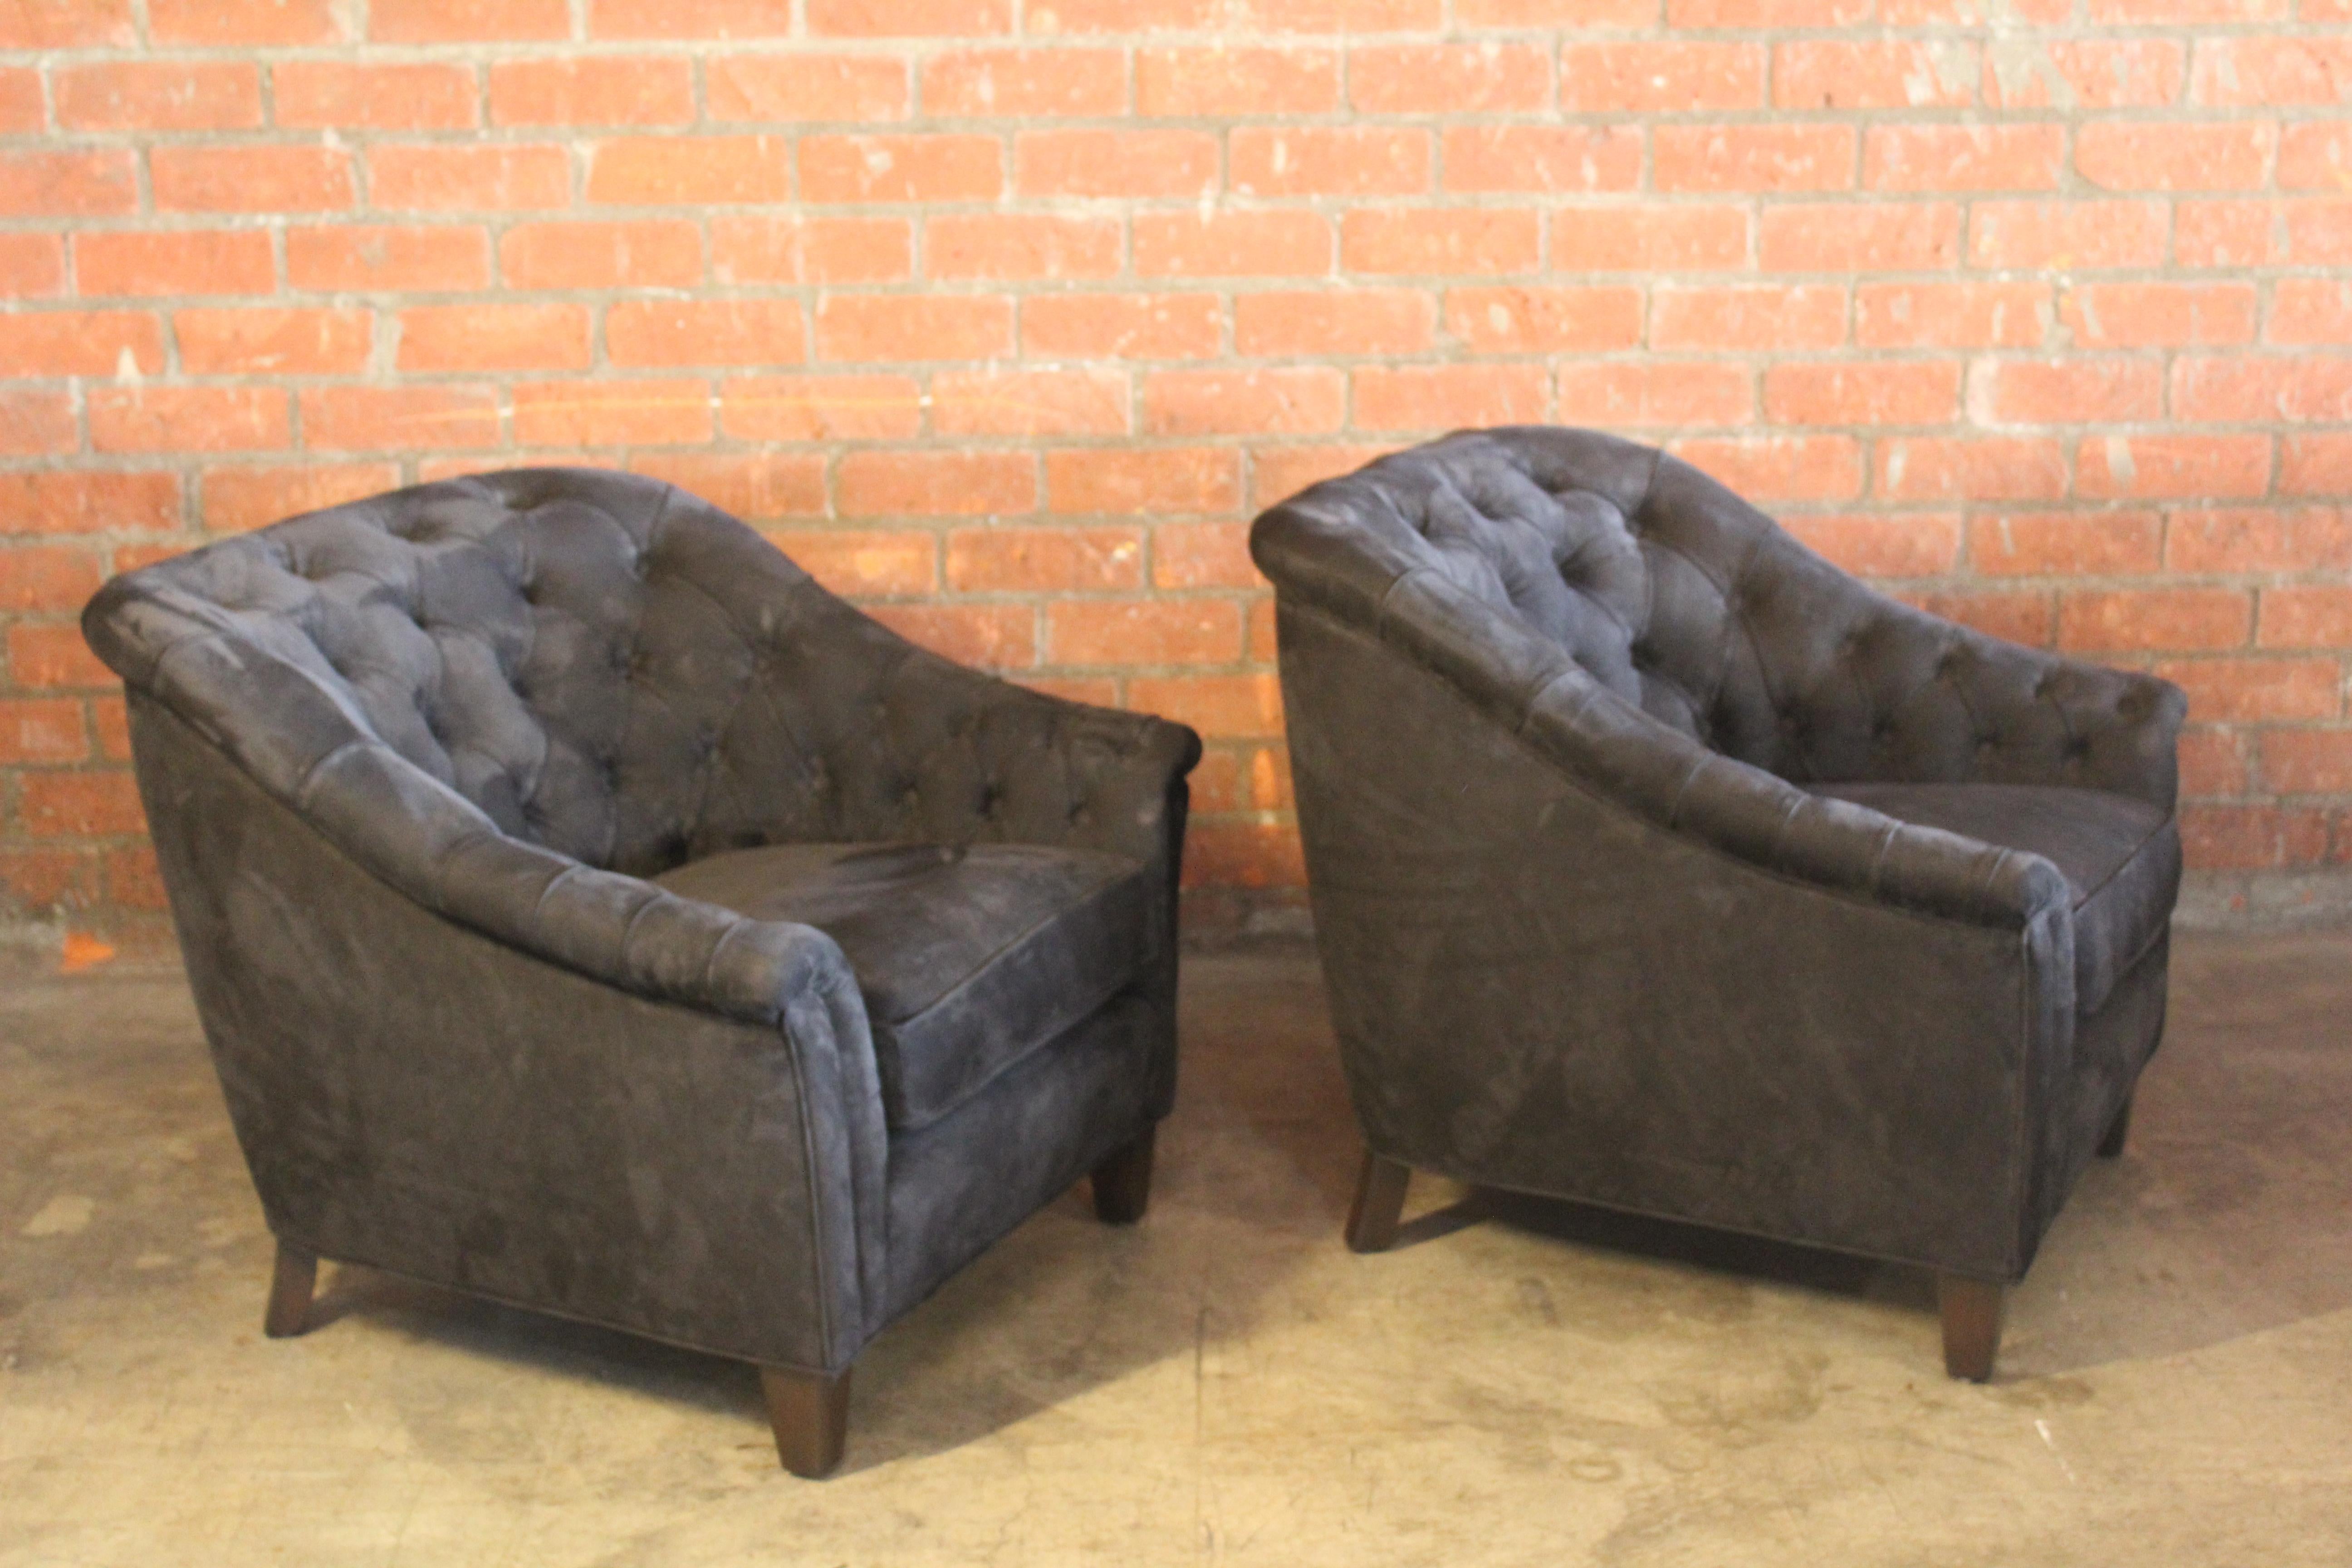 Pair of Tufted Leather Club Chairs, France, 1960s For Sale 4